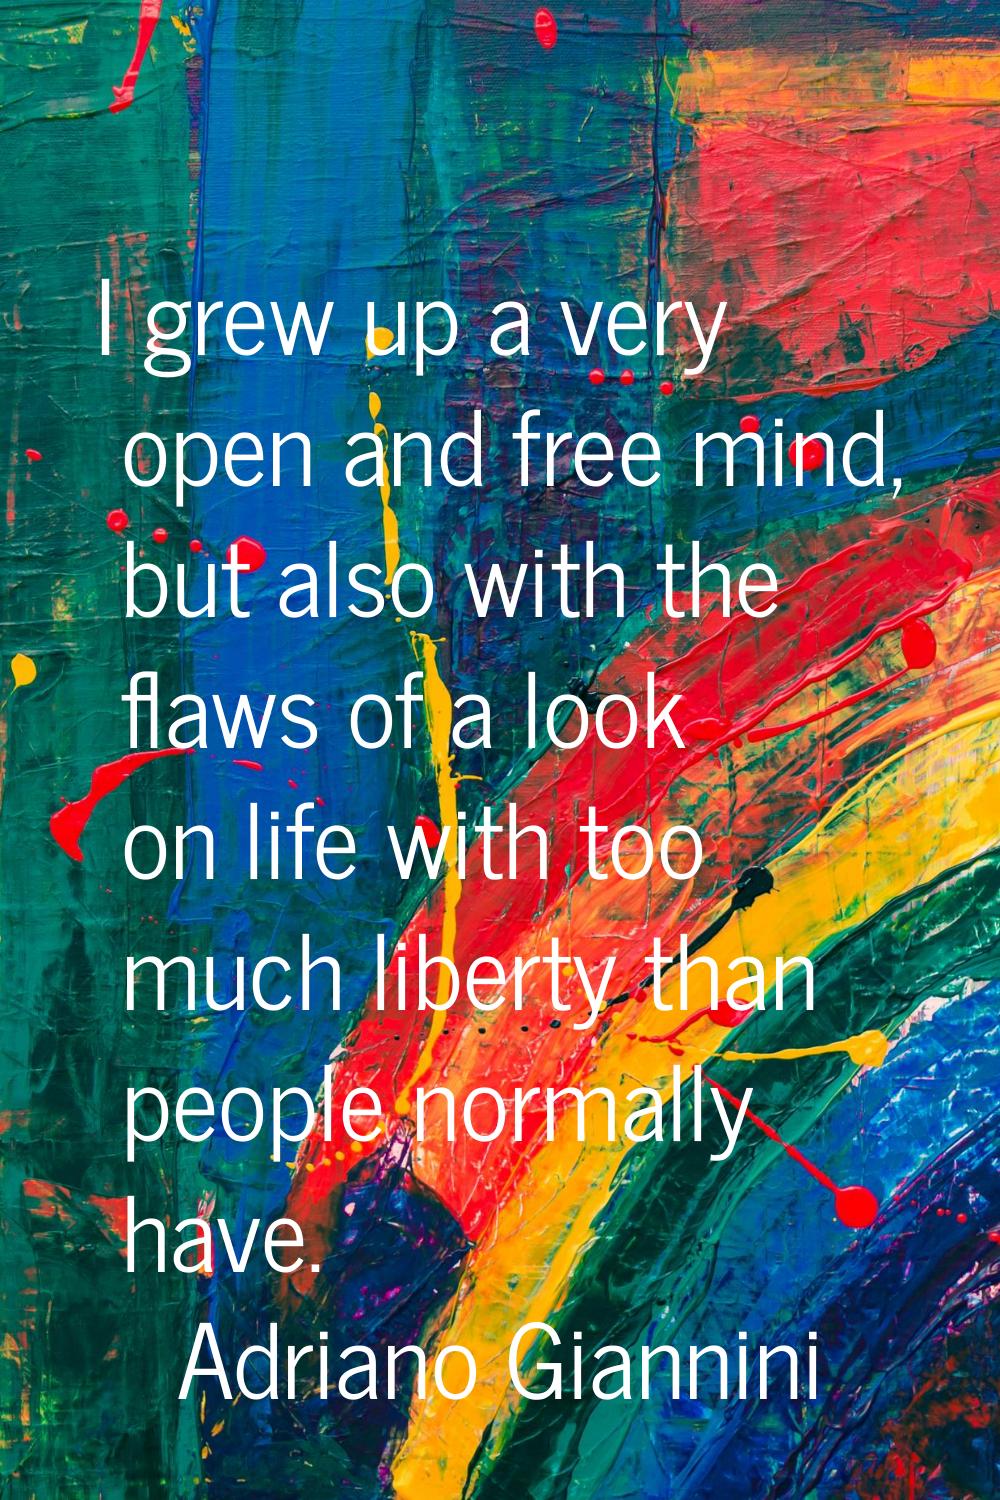 I grew up a very open and free mind, but also with the flaws of a look on life with too much libert